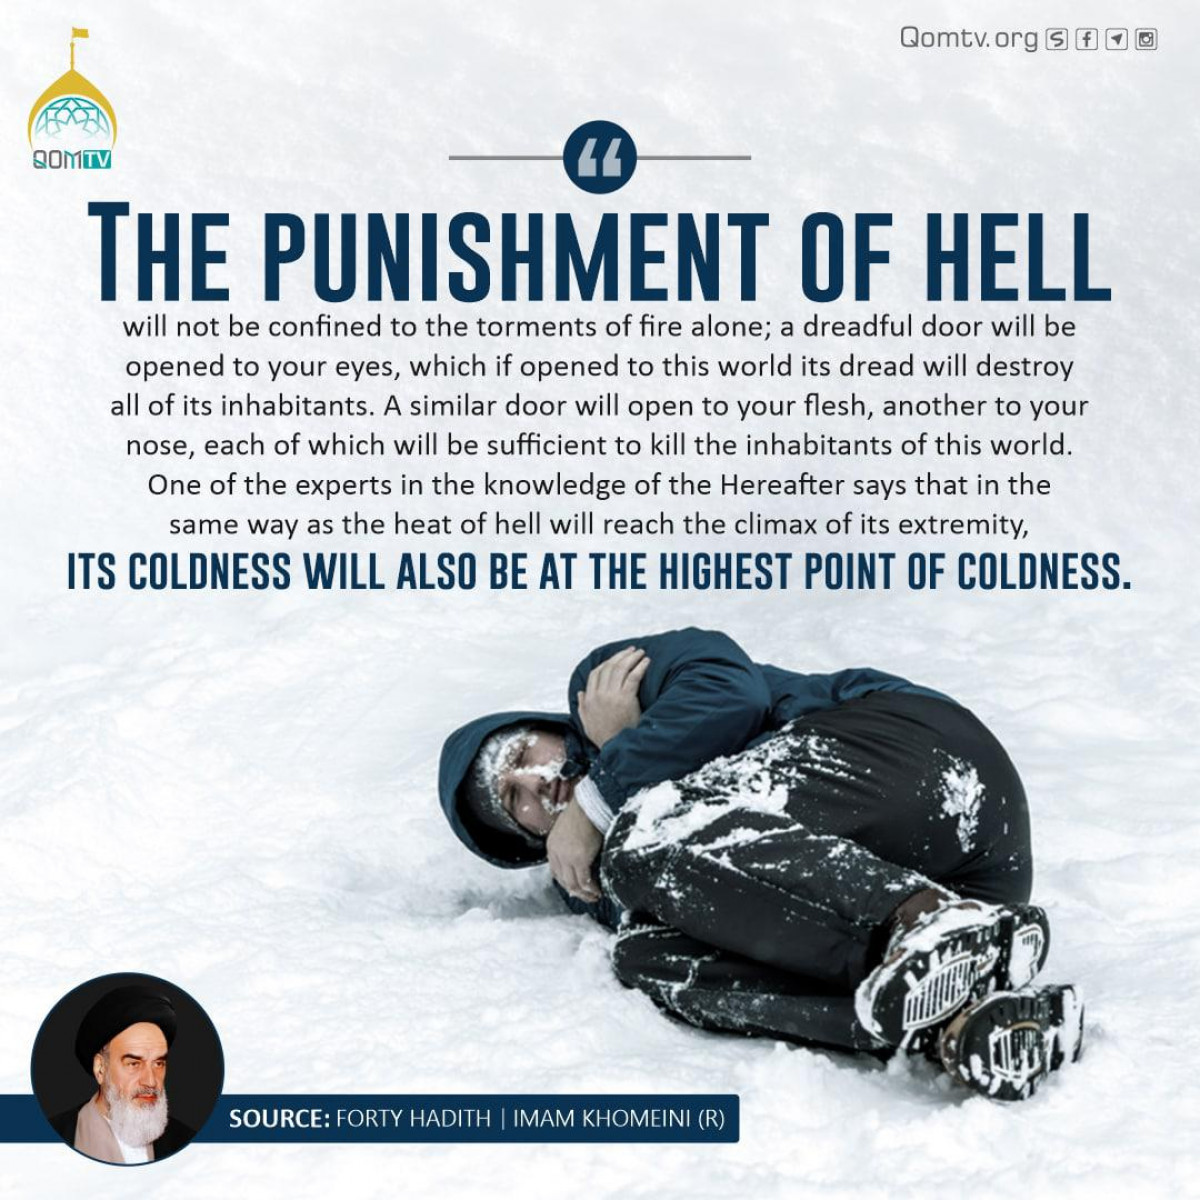 The punishment of hell will not be confined to the torments of fire alone